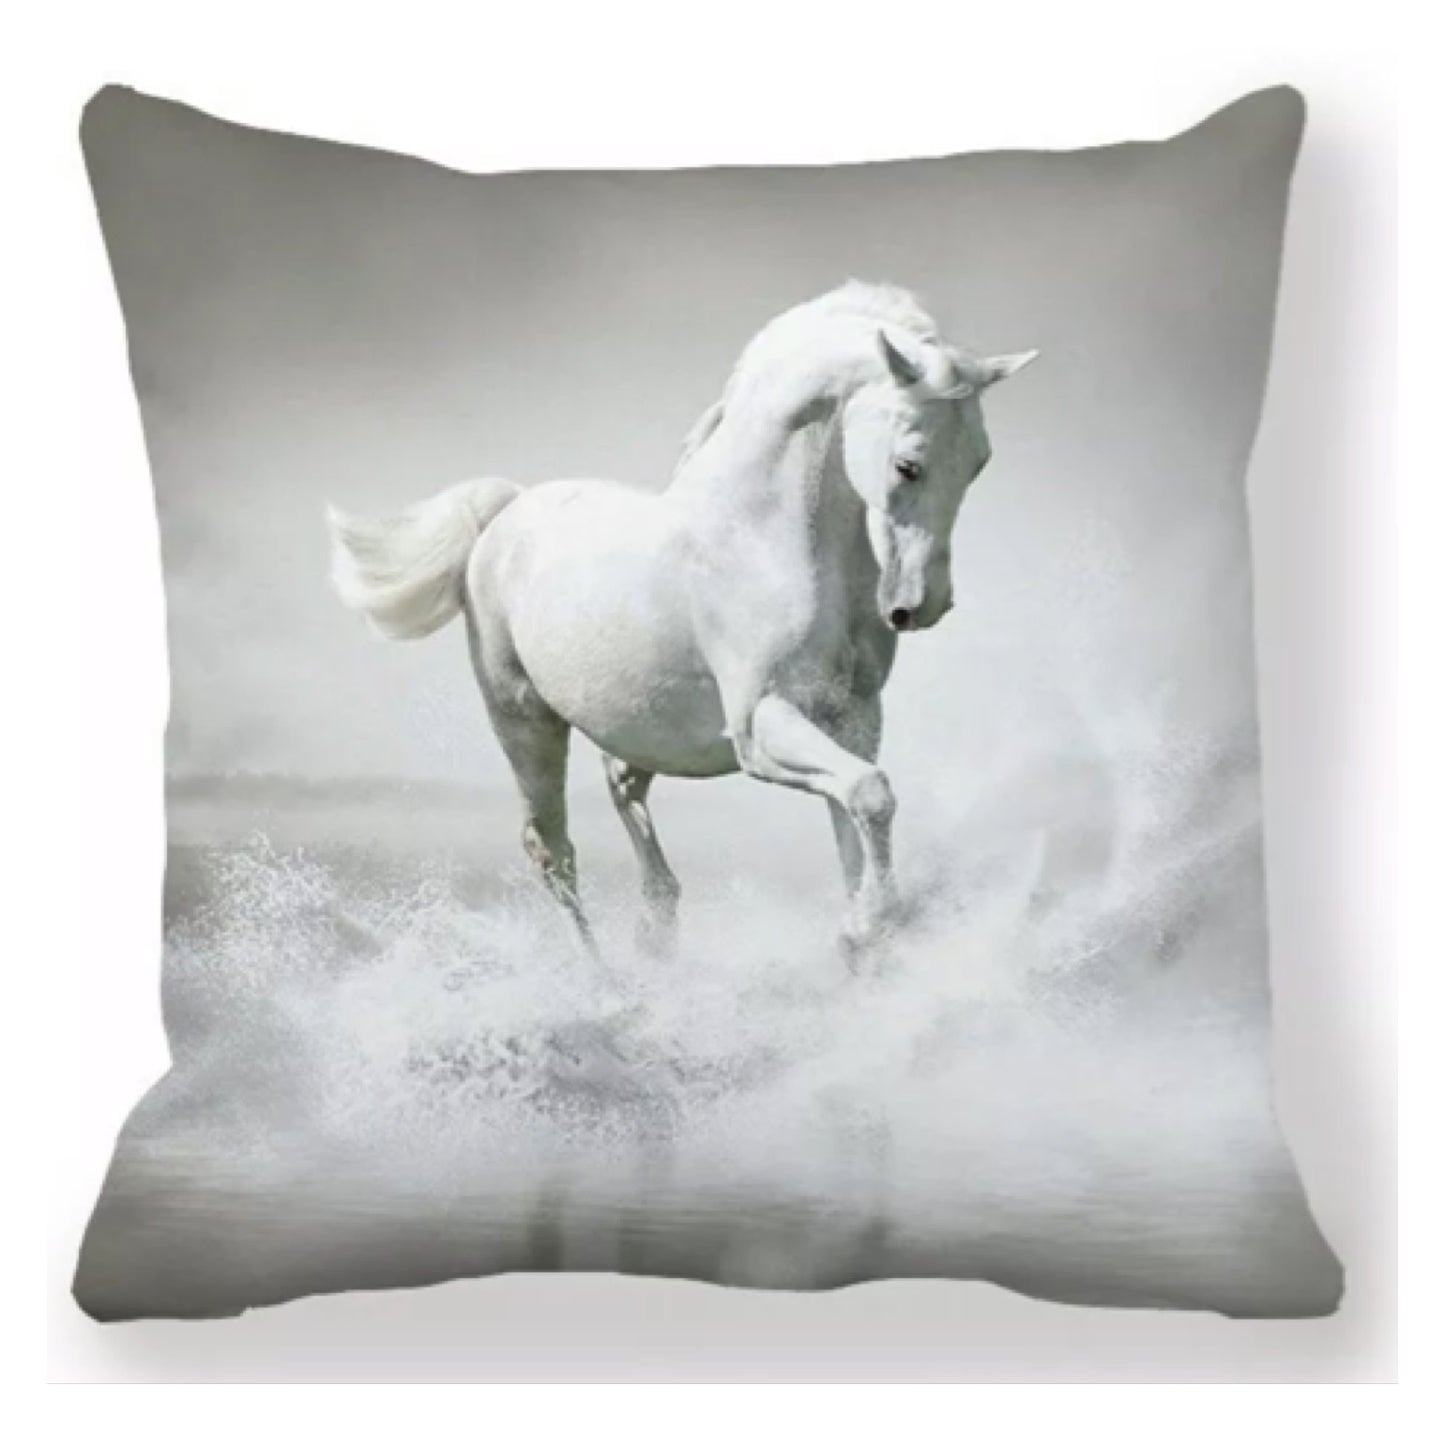 Cushion Cover Horse White Wisdom - The Renmy Store Homewares & Gifts 